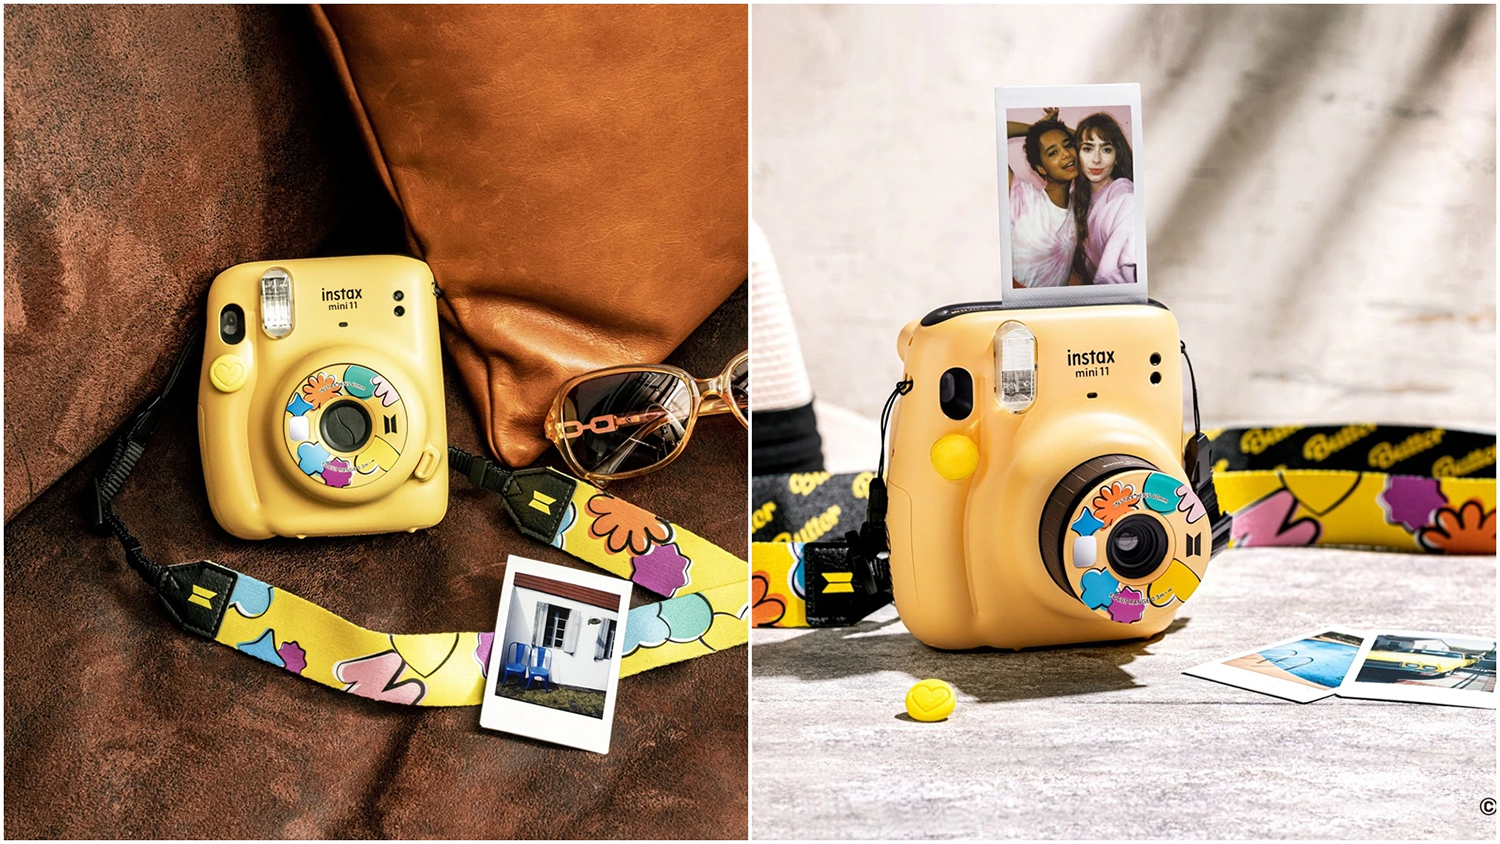 analog_house_instax_mini_11_butter_bts_edition